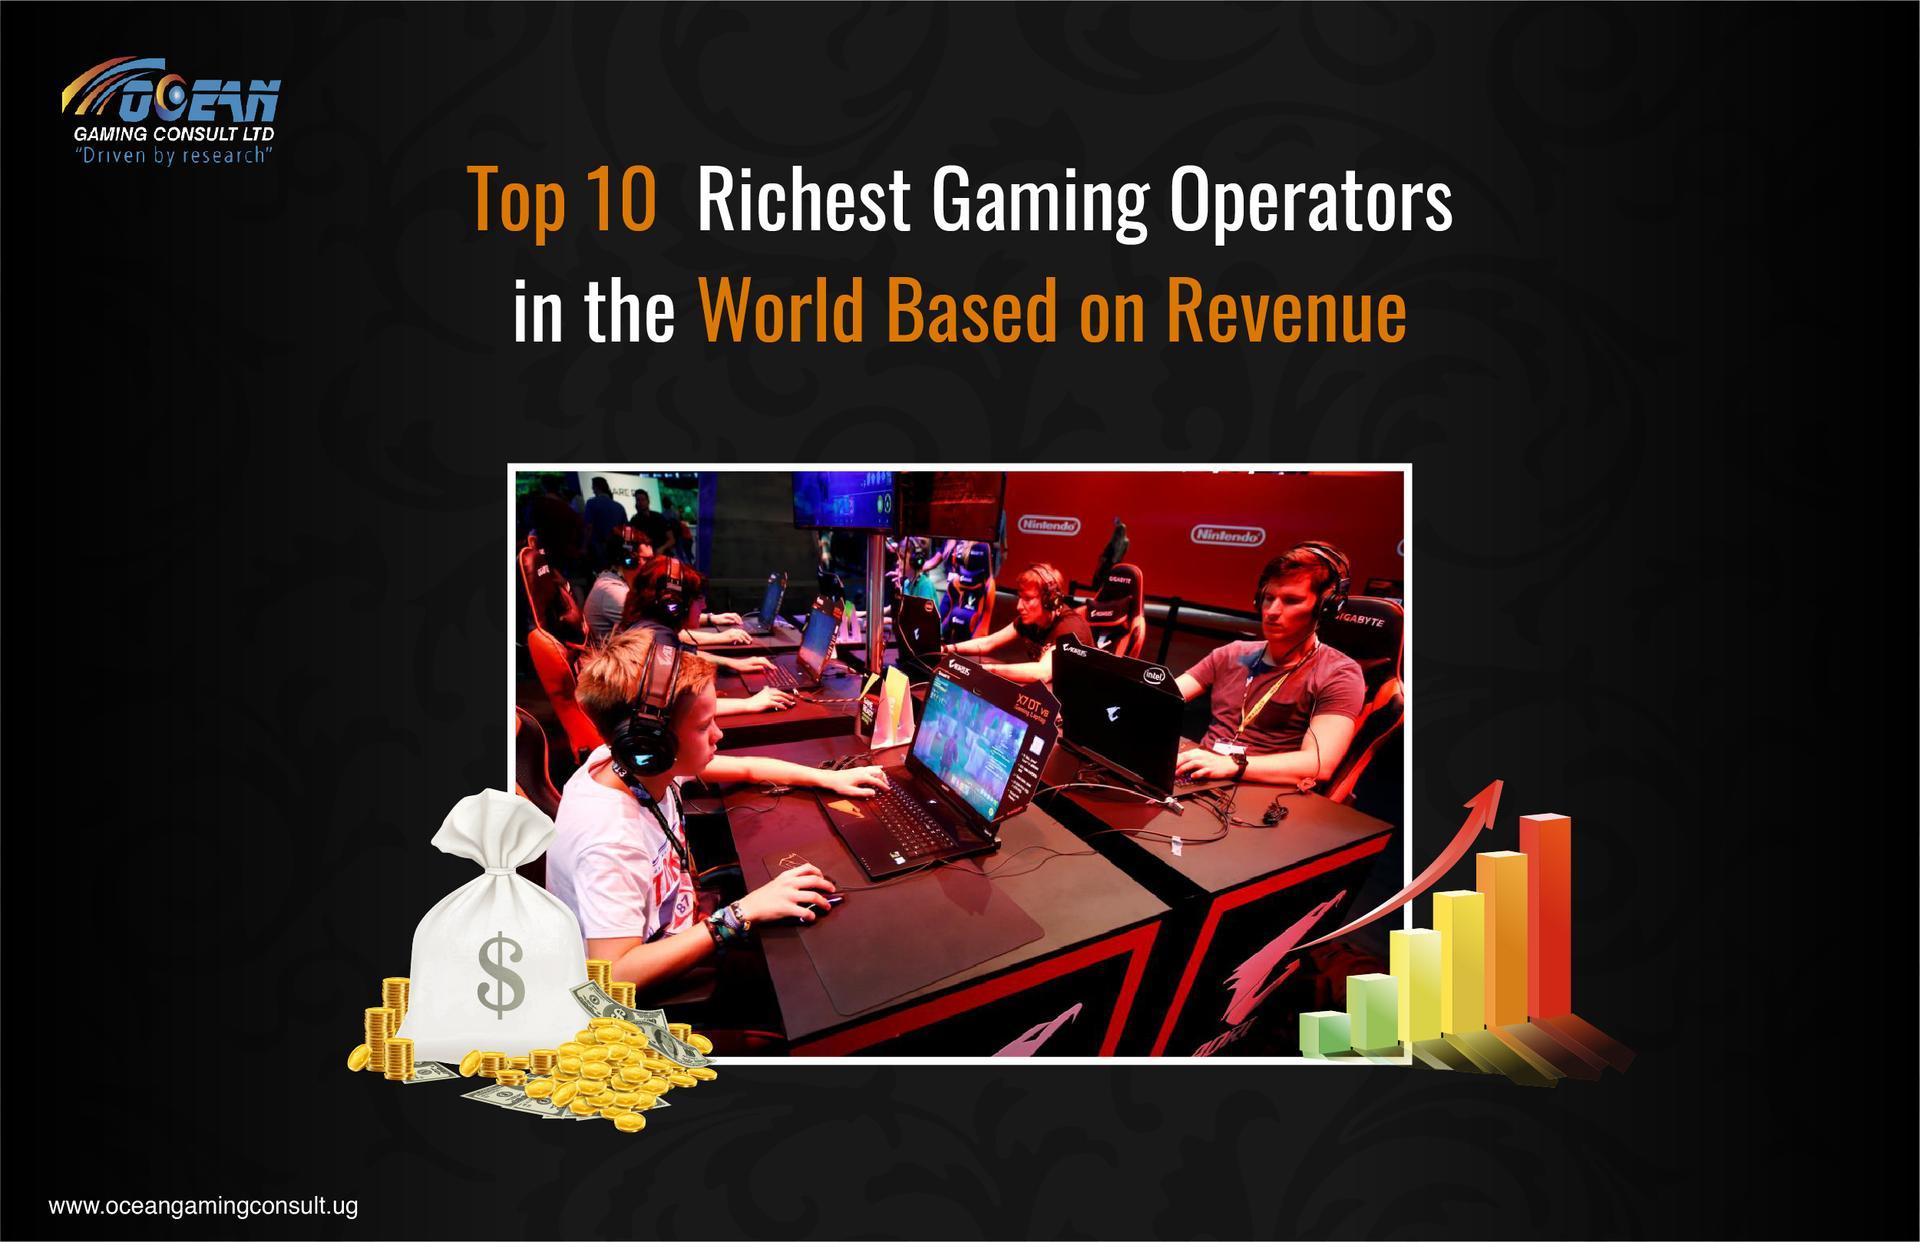 Top 10 Richest Gaming Operators in the World Based on Revenue